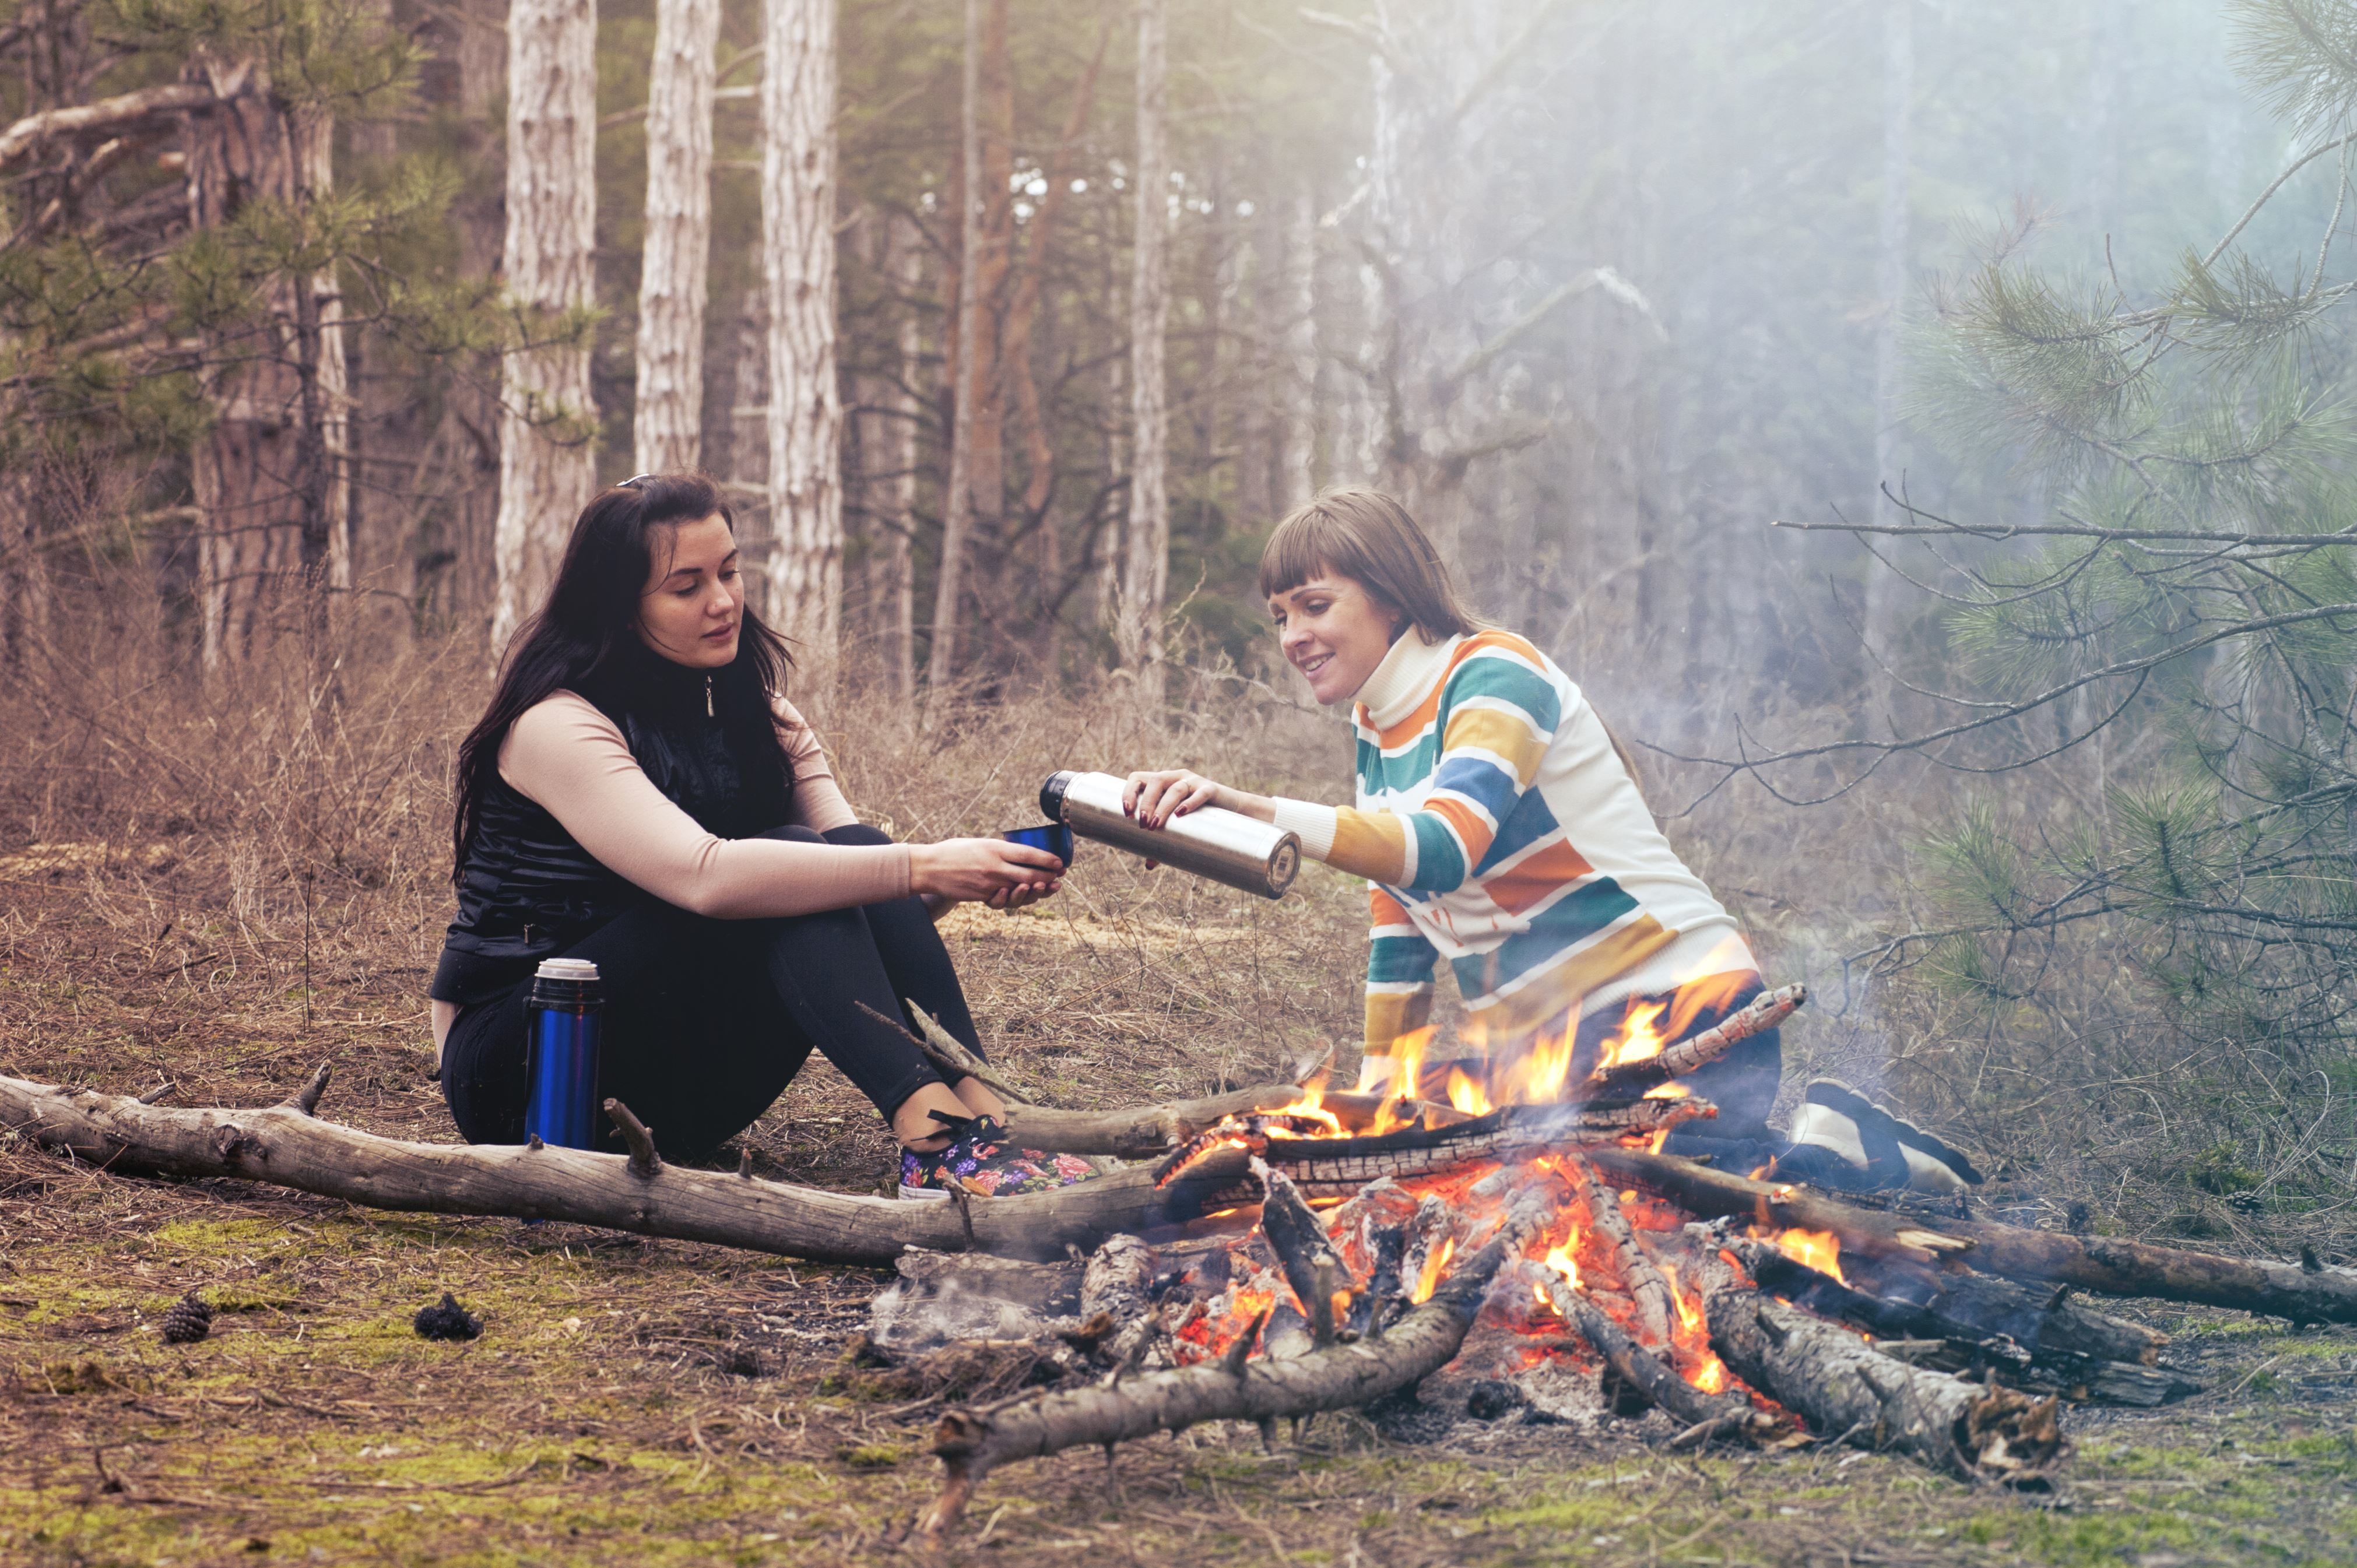 Free Picture Picnic Forest Women Wood Barbecue Campfire Outdoor